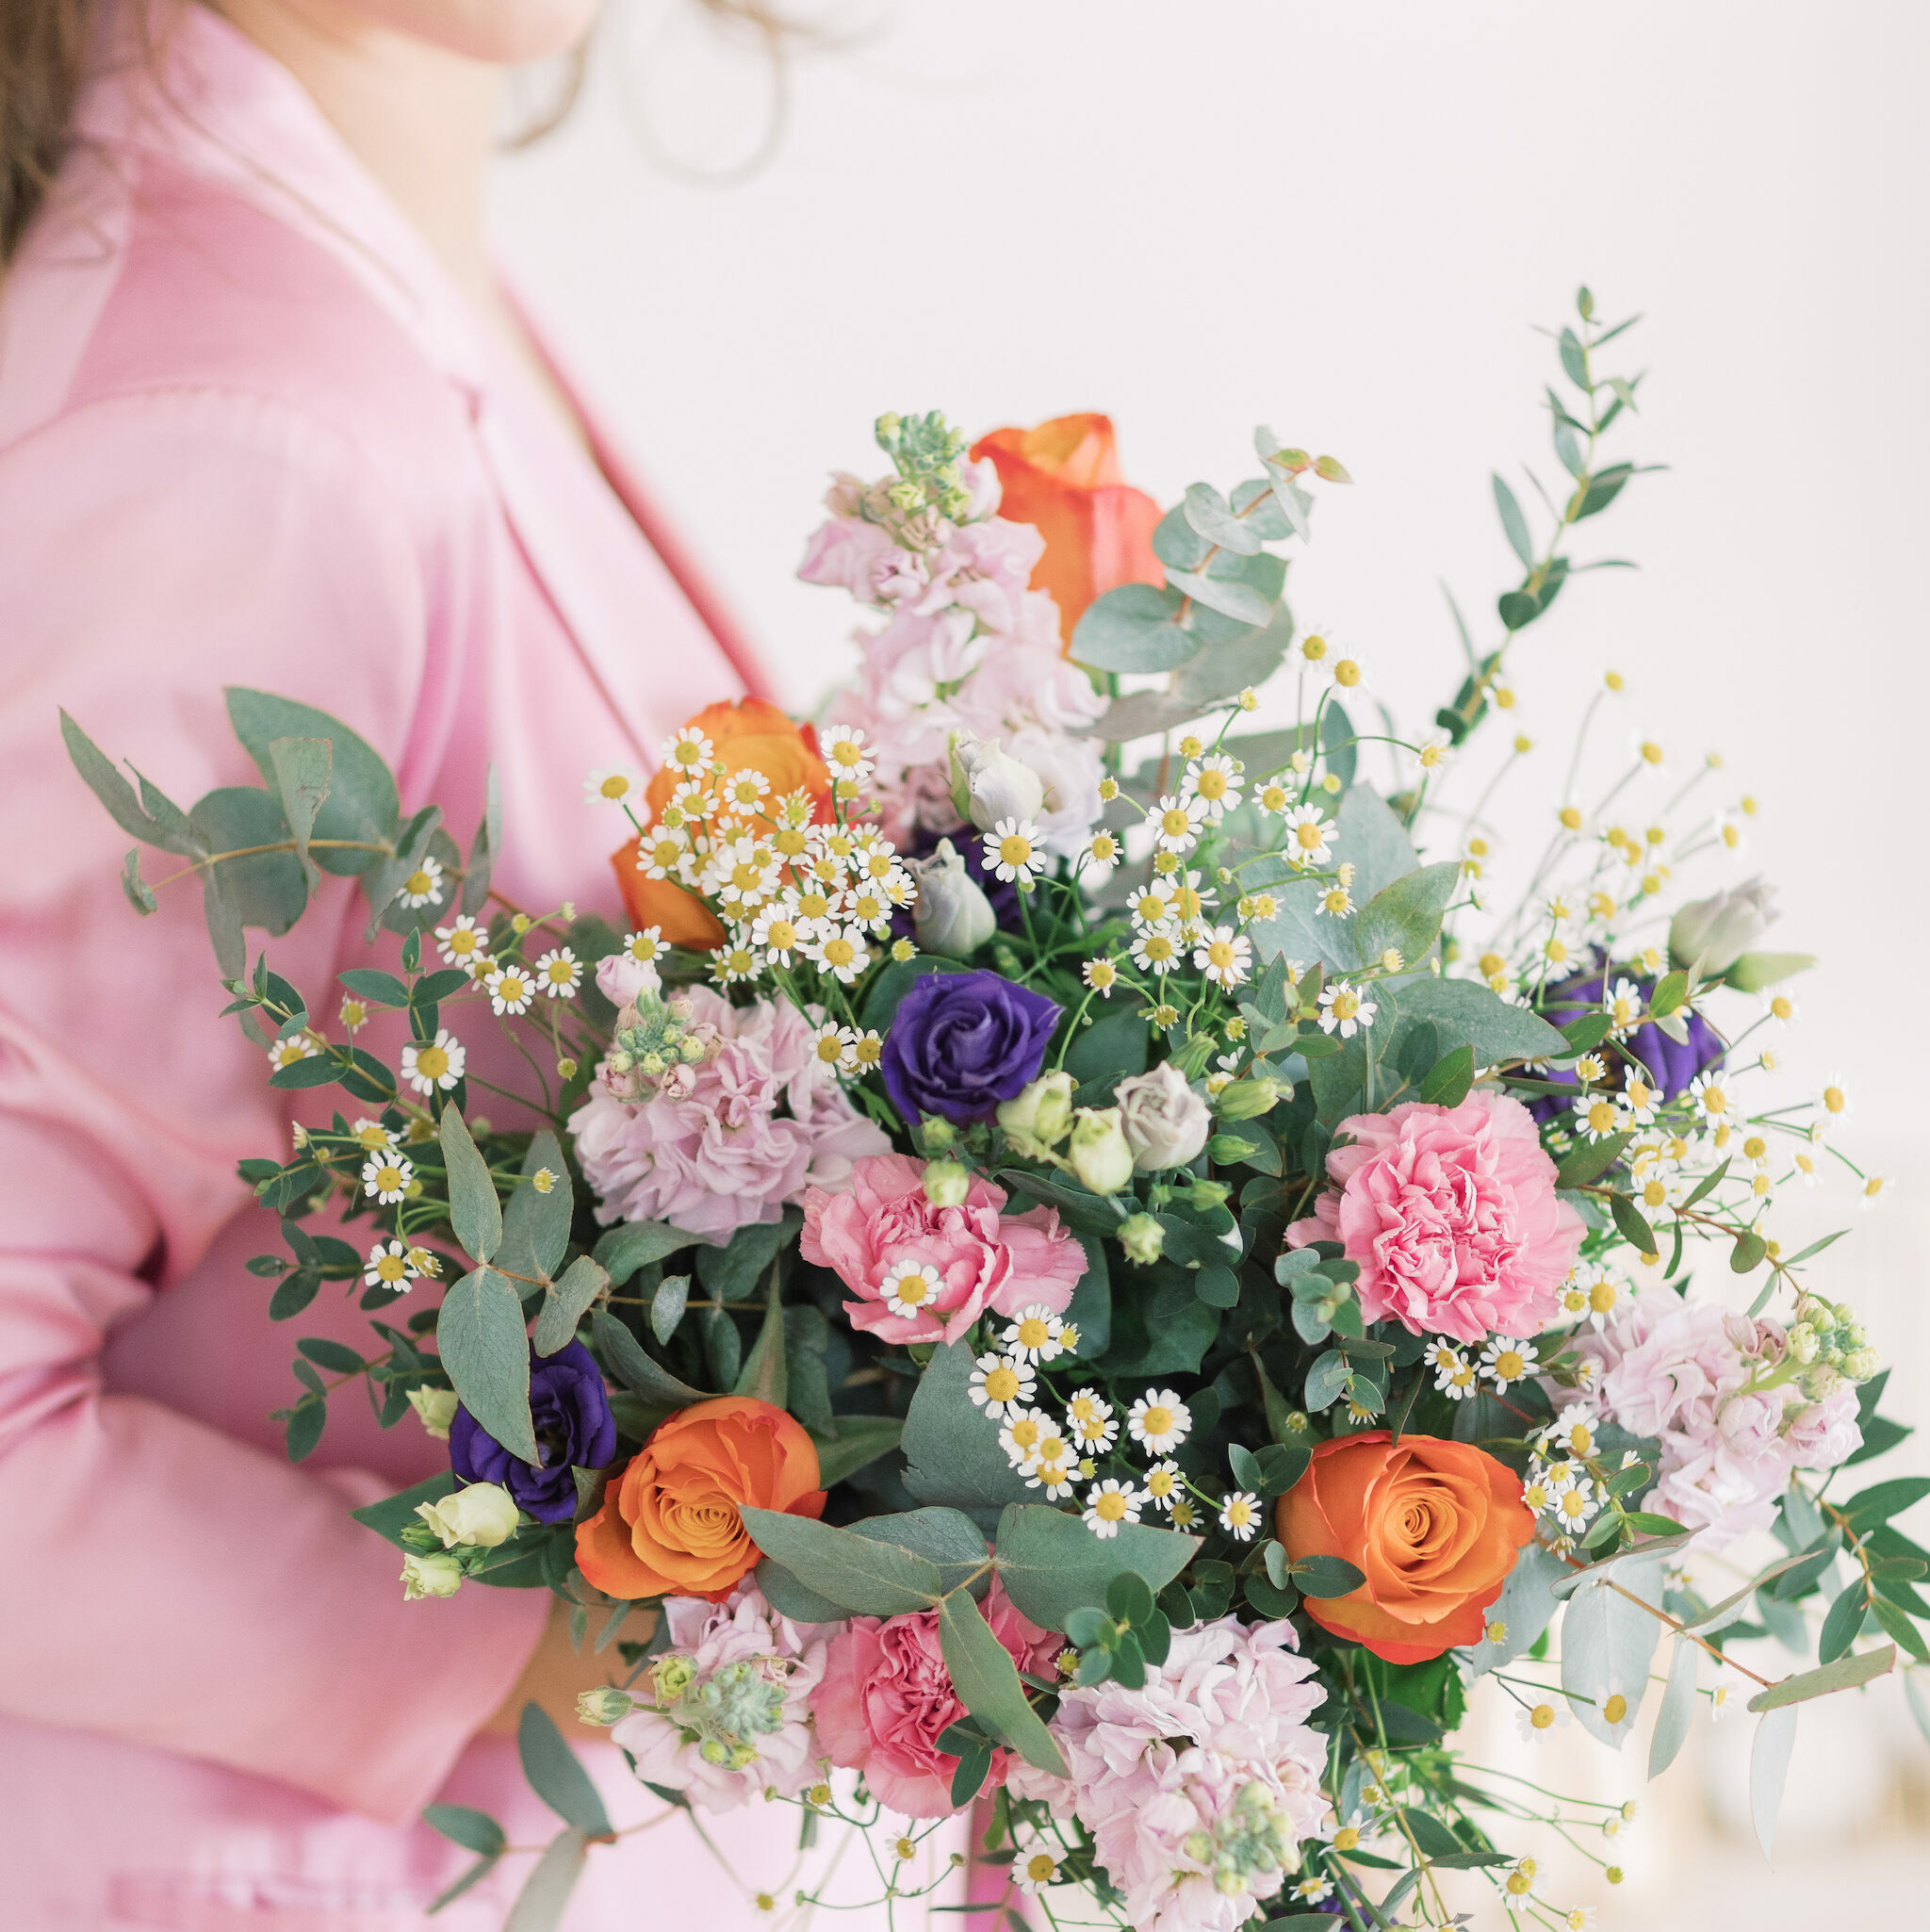 Send a bouquet to Strombeek-bever within 24 hours